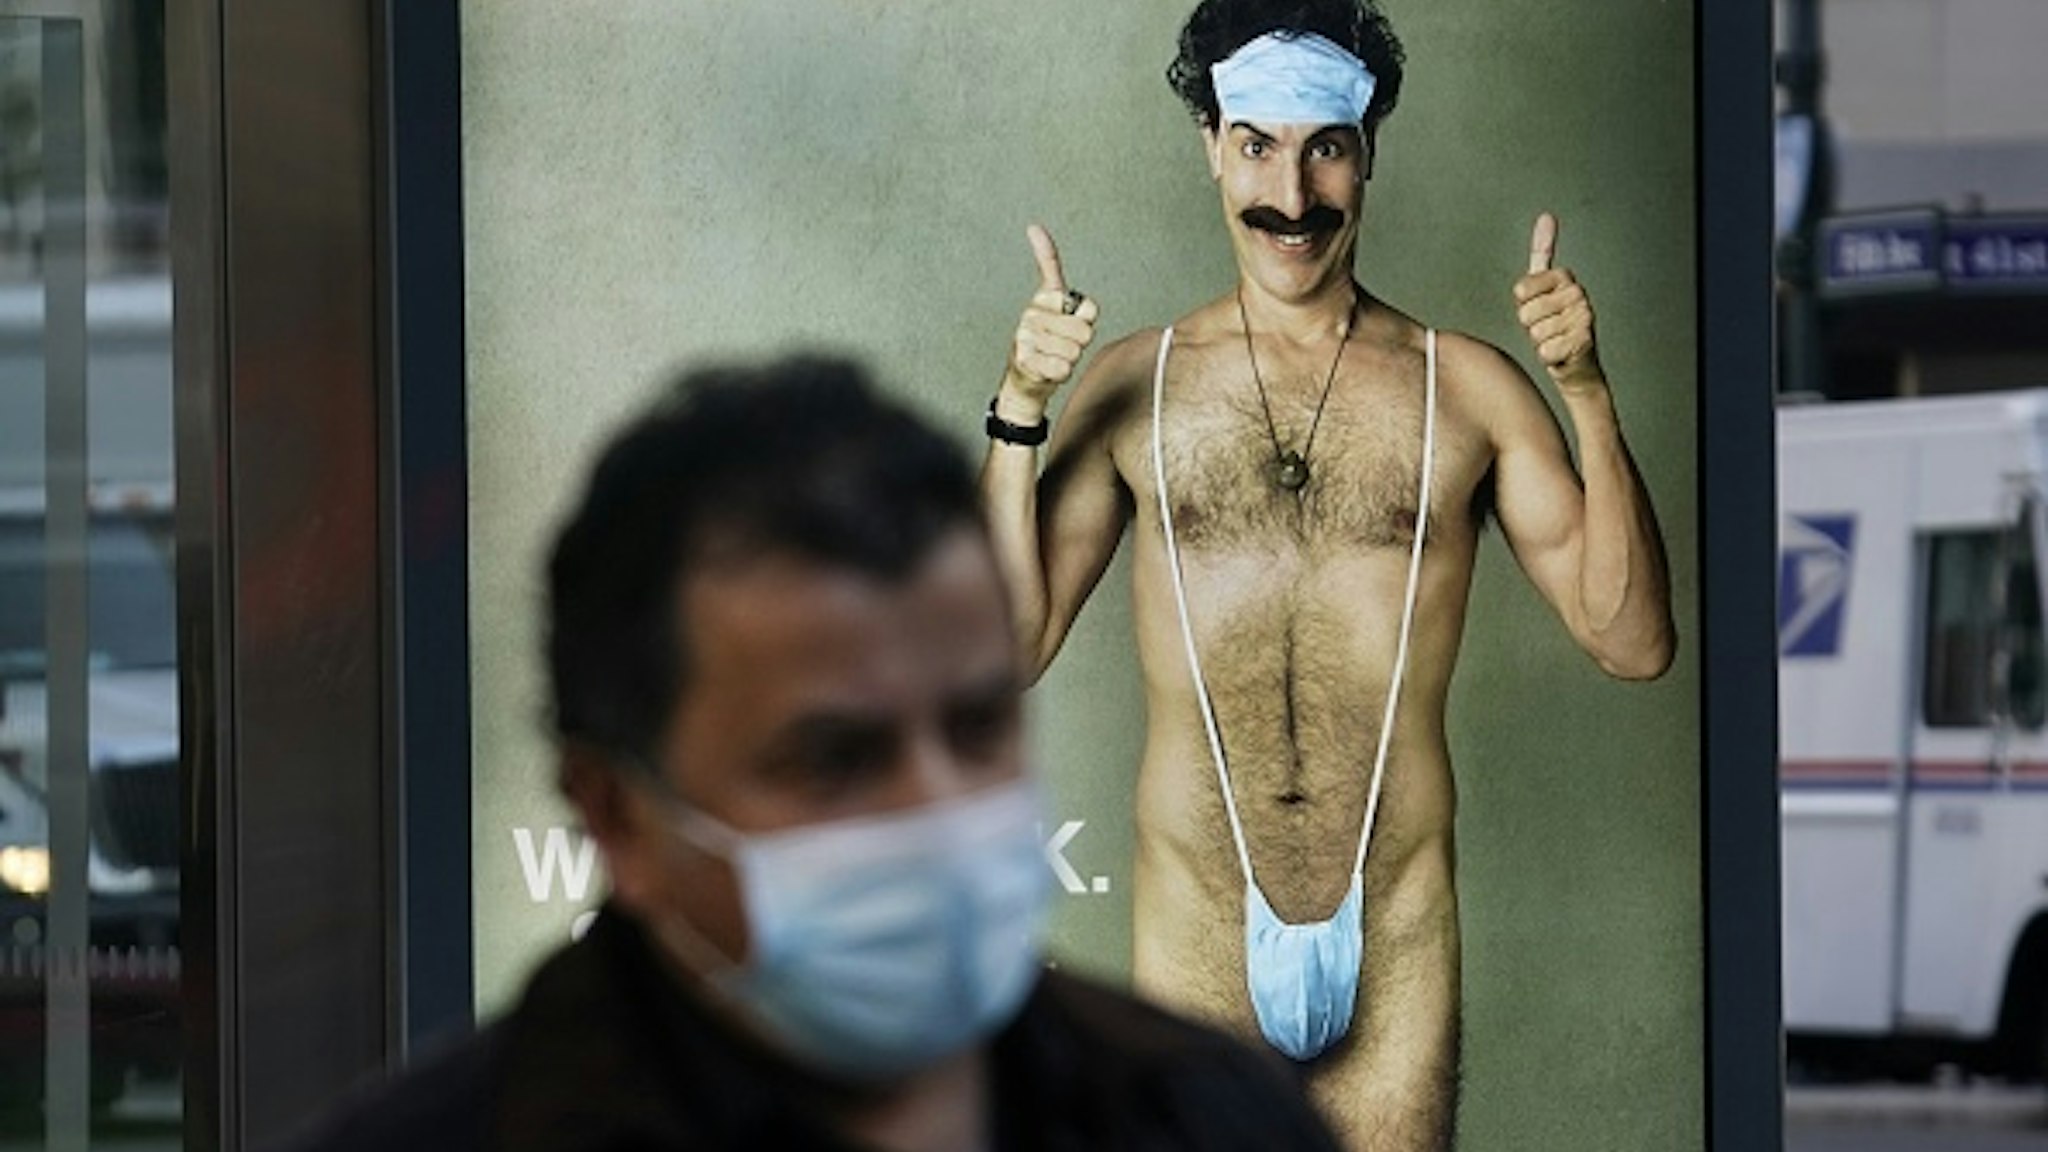 A person wearing a mask walks past a bus stop ad on 5th Avenue, October 15, 2020, for the upcoming movie "Borat 2," featuring actor Sacha Baron Cohen, ahead of its release on October 23. - The poster gives reference to the Covid-19 pandemic by replacing Borats iconic green mankini with a face mask.